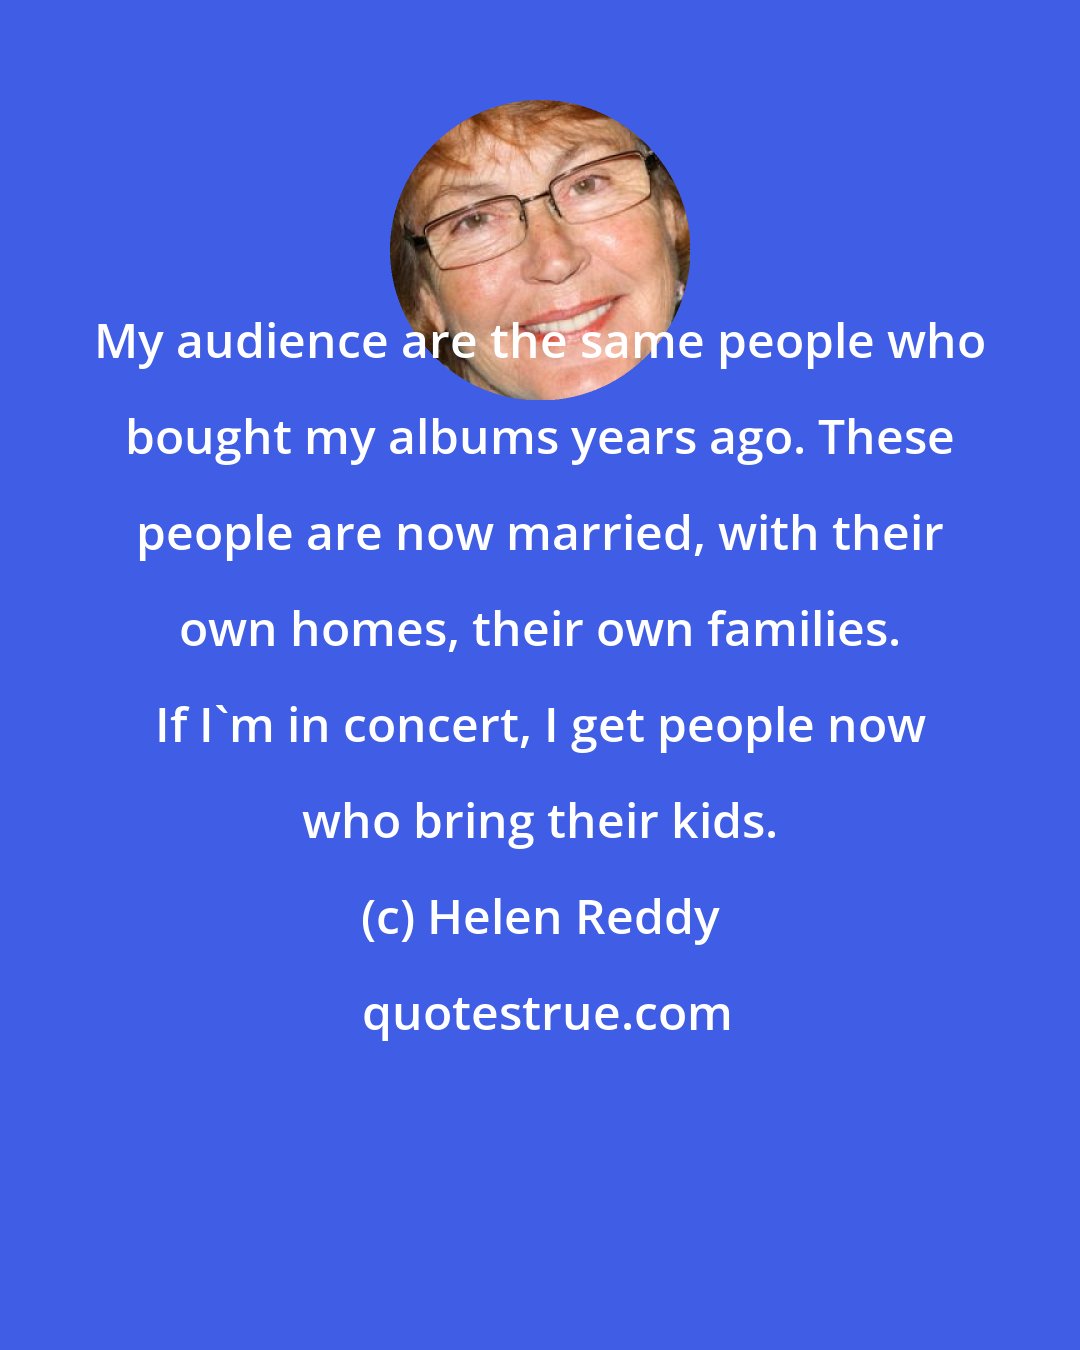 Helen Reddy: My audience are the same people who bought my albums years ago. These people are now married, with their own homes, their own families. If I'm in concert, I get people now who bring their kids.